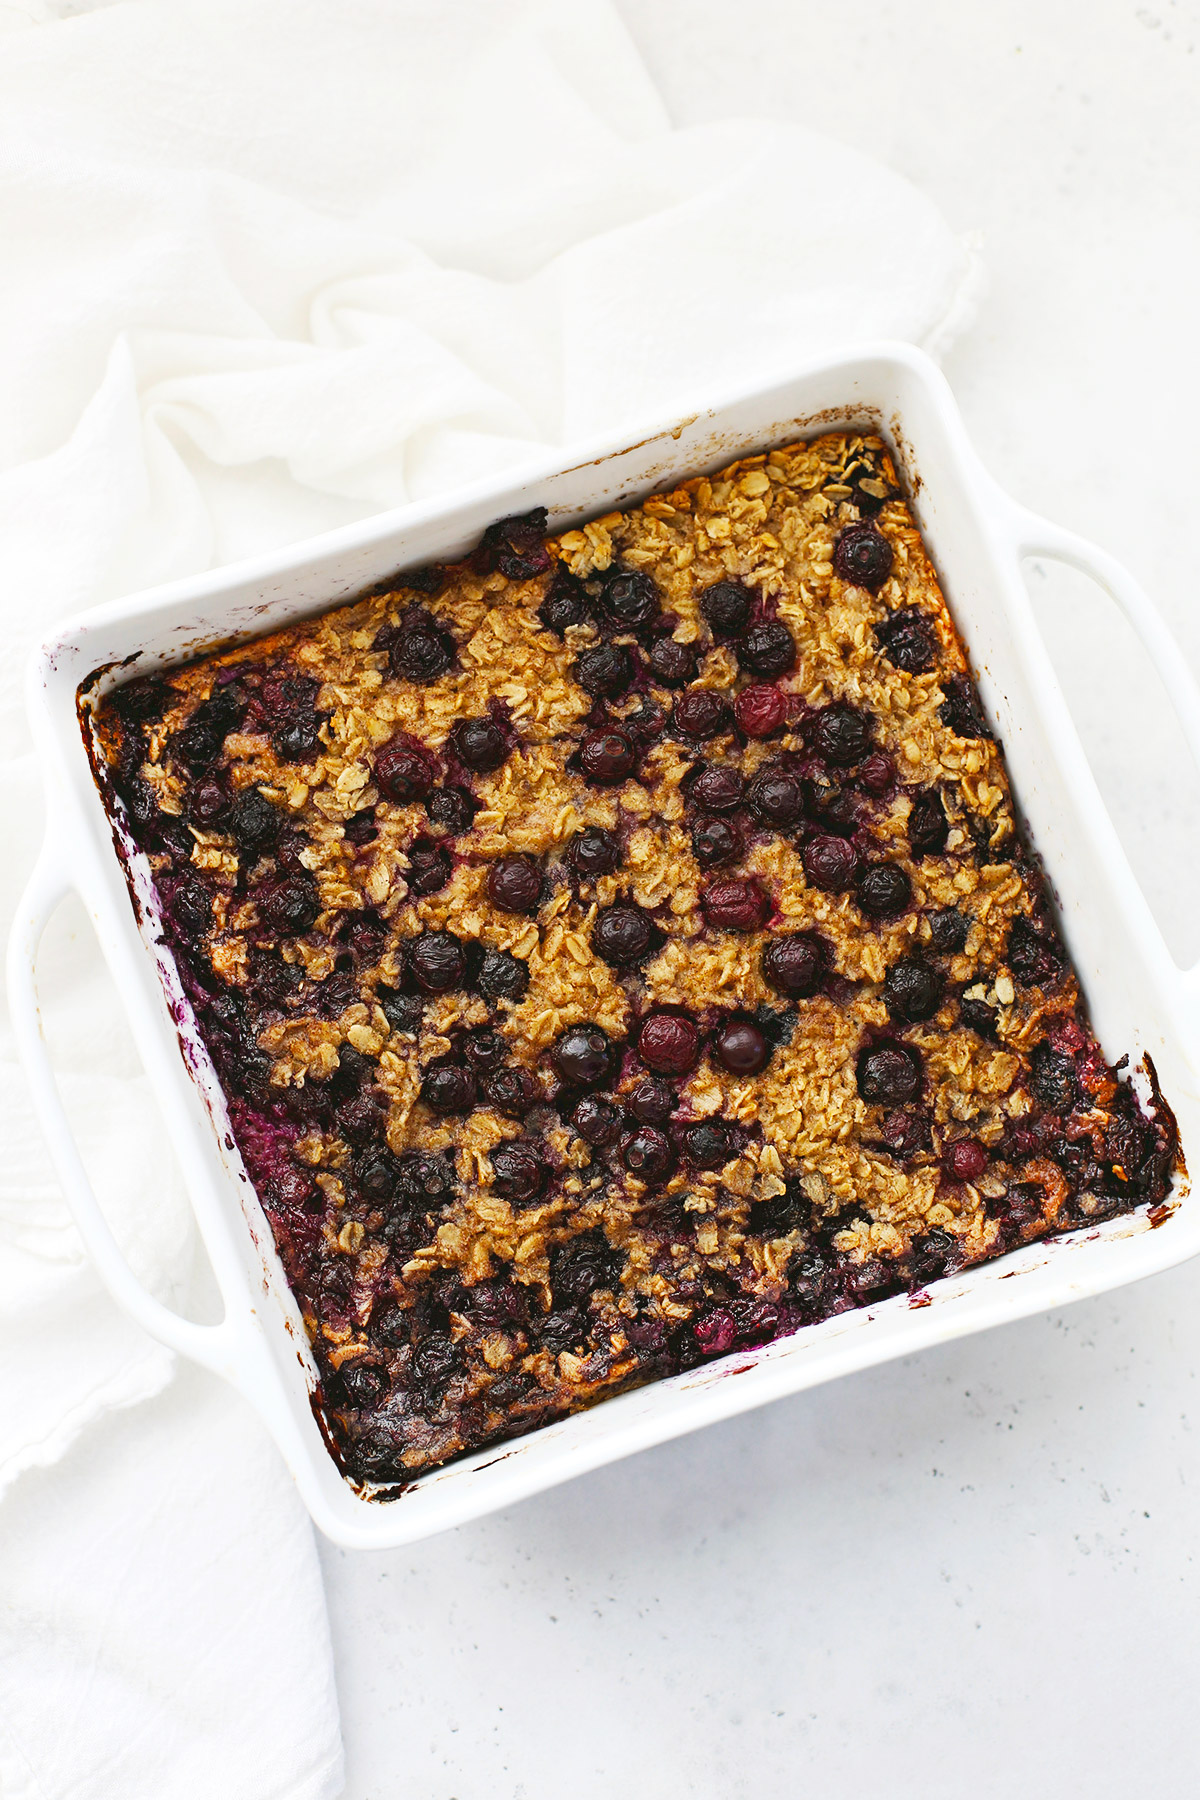 A white baking dish of blueberry baked oatmeal on a white background